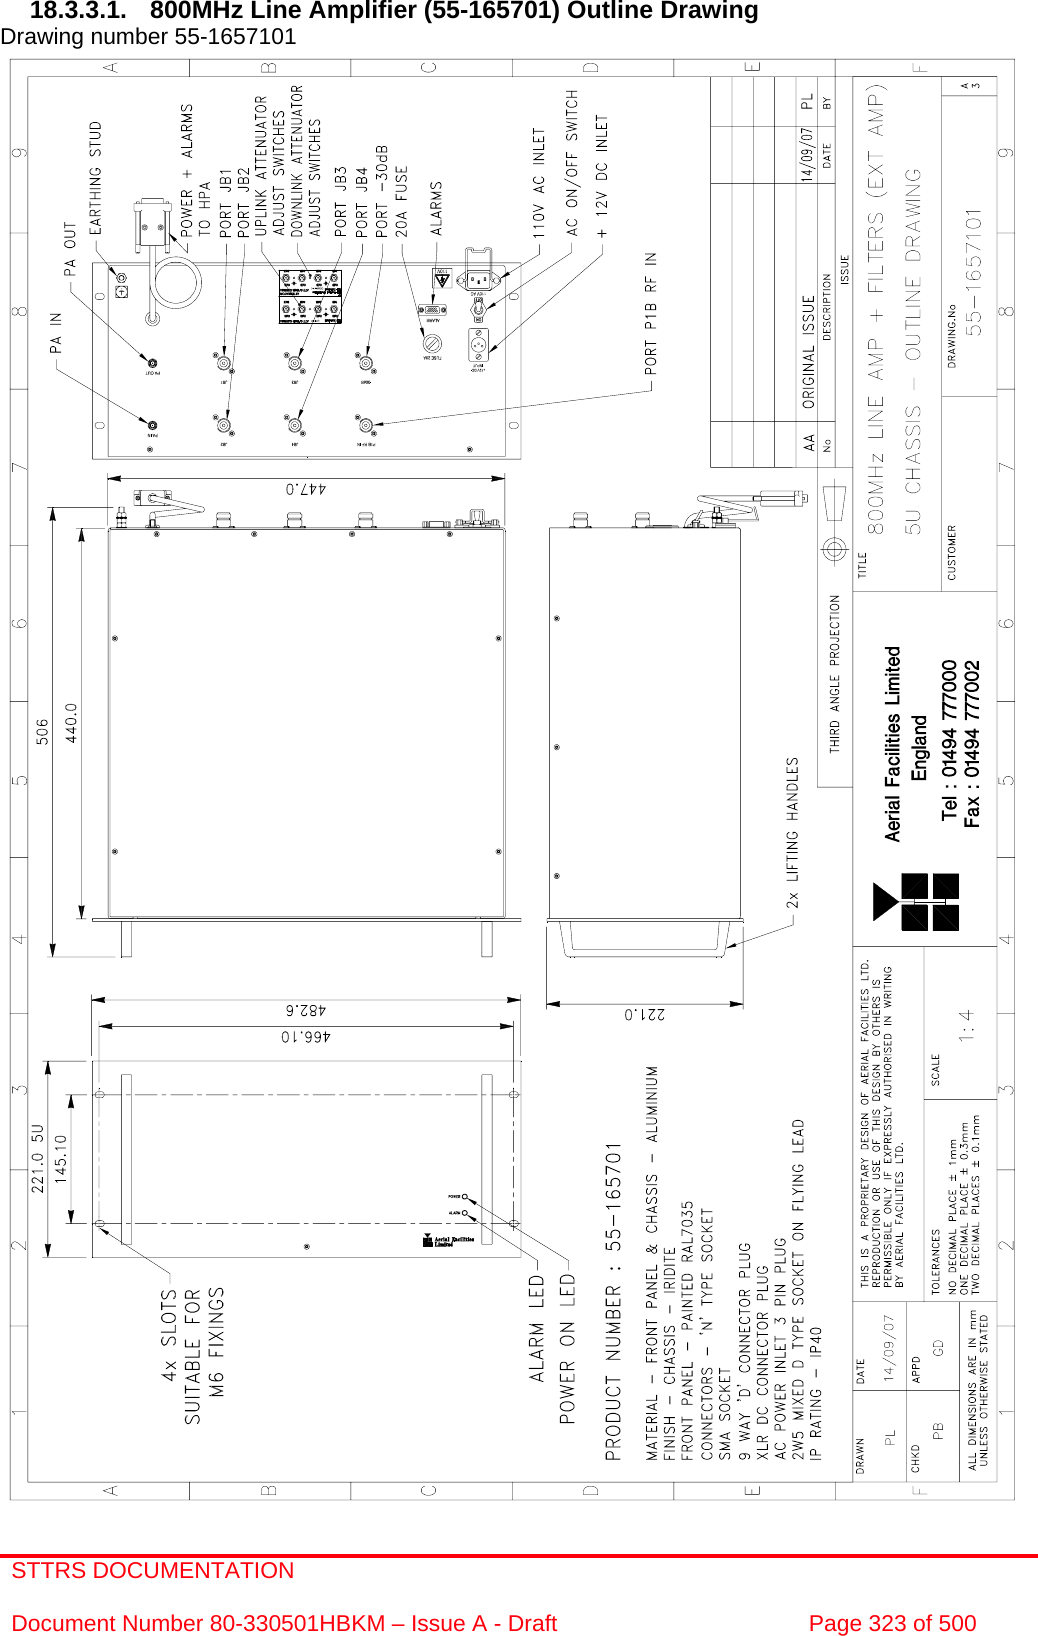 STTRS DOCUMENTATION  Document Number 80-330501HBKM – Issue A - Draft  Page 323 of 500   18.3.3.1.  800MHz Line Amplifier (55-165701) Outline Drawing  Drawing number 55-1657101                                            